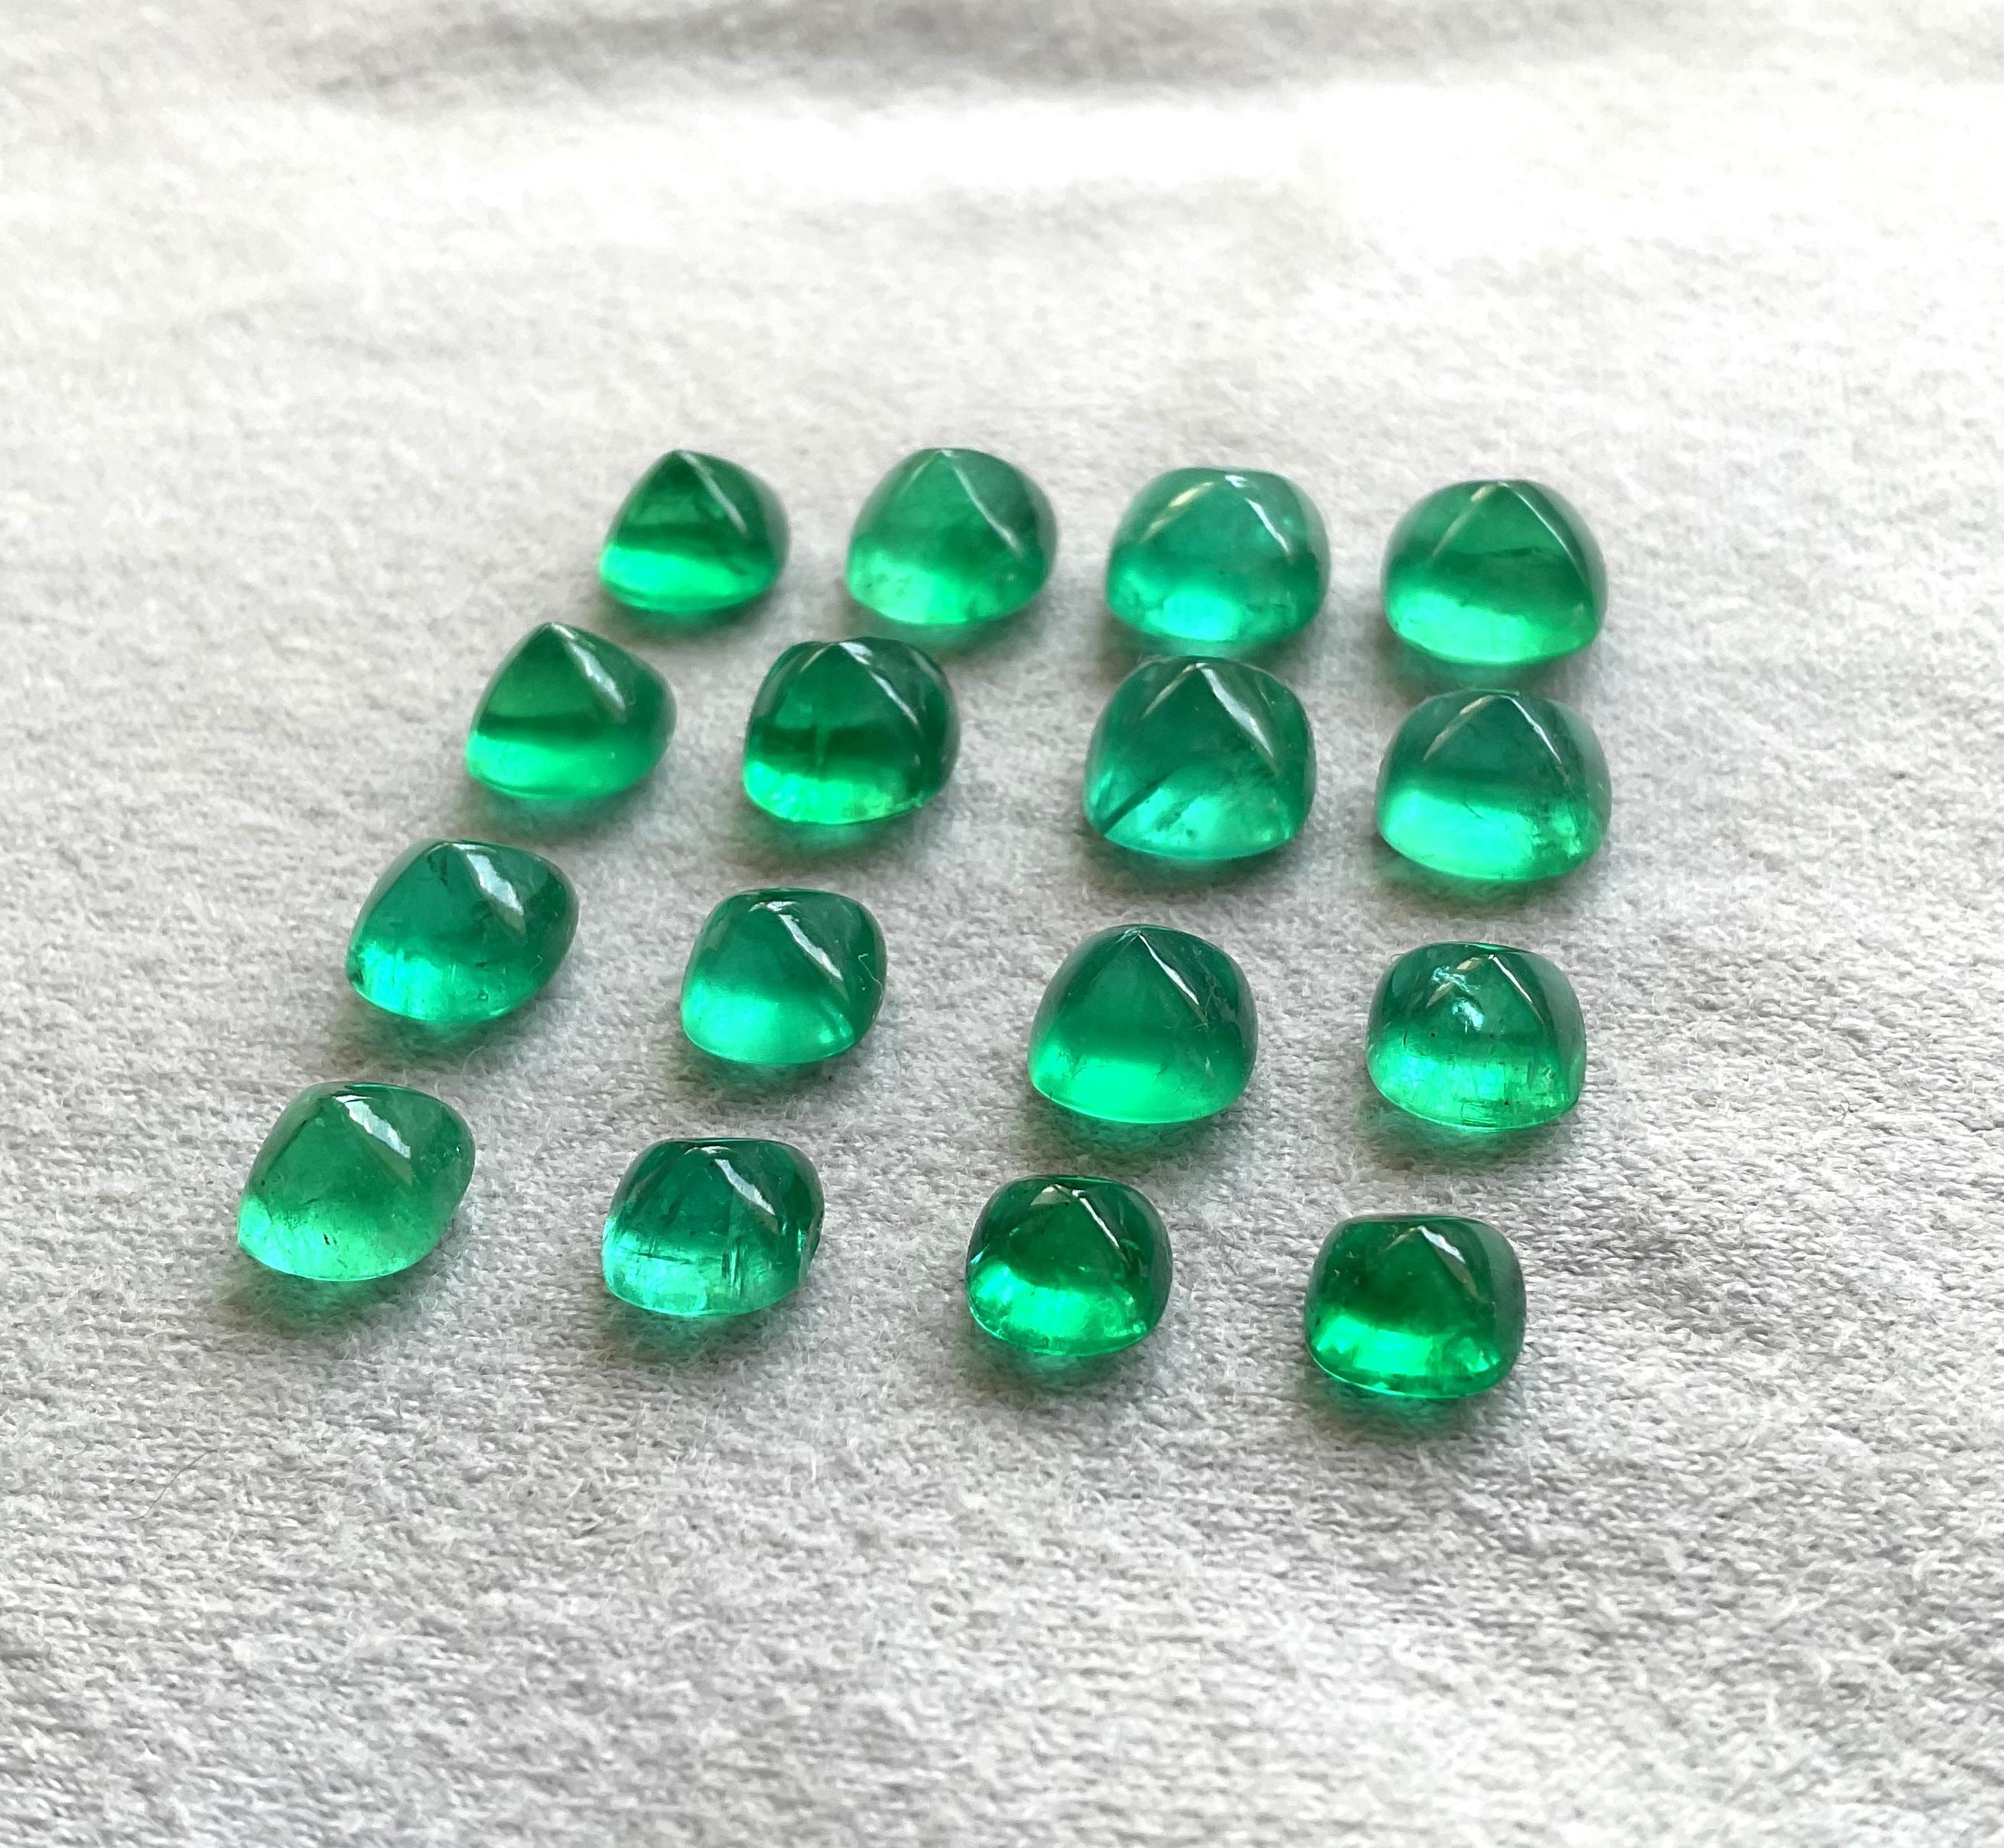 59.30 Carats Zambian Emerald Sugarloaf Cabochon Lot Top Quality Natural Gemstone For Sale 3